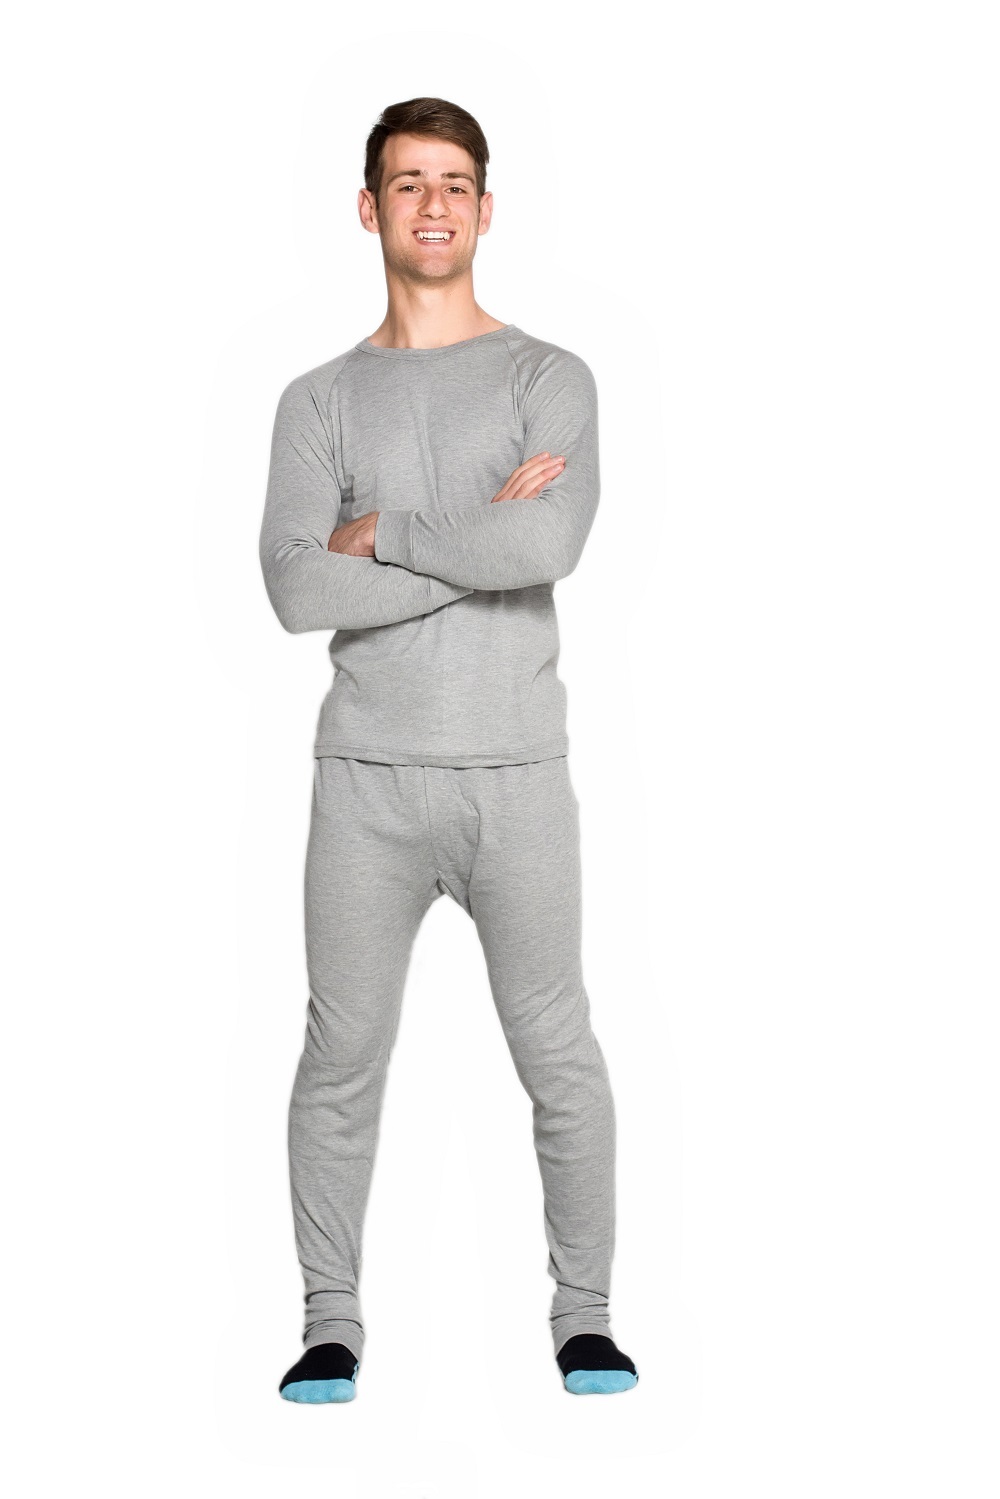 The best thermal underwear to buy this Christmas